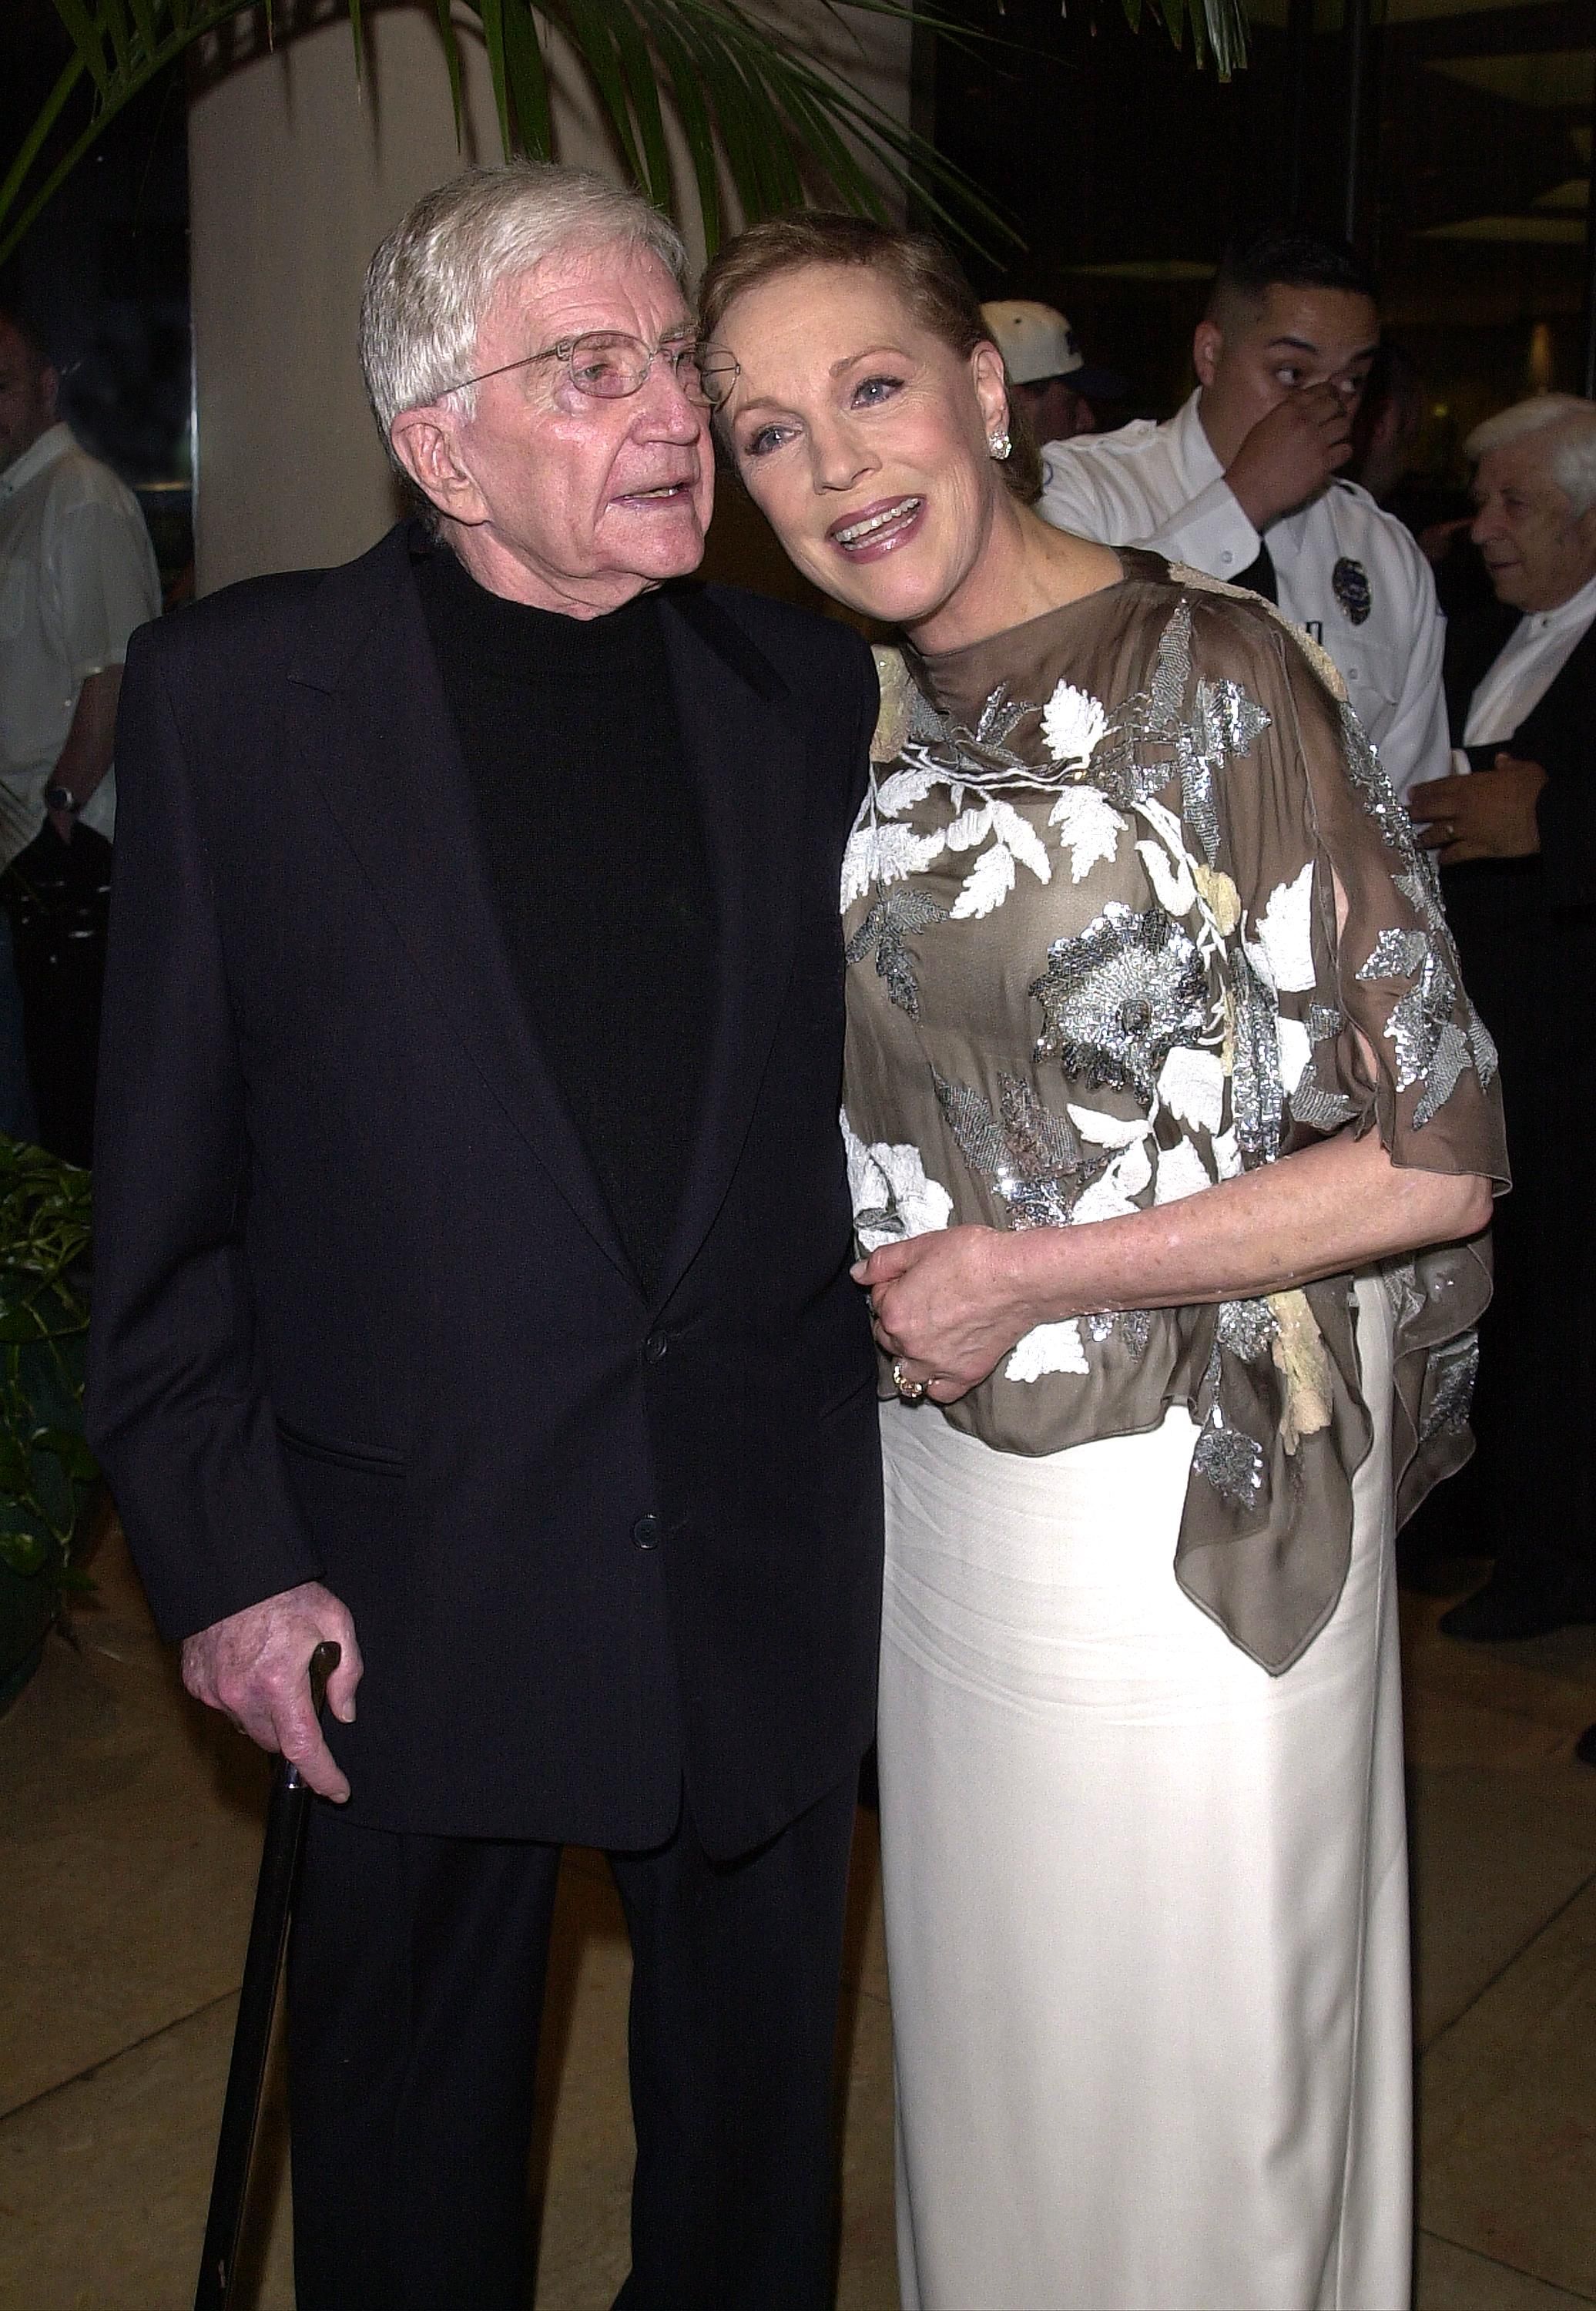 Blake Edwards and Julie Andrews at the 10th Annual Ella Awards on April 25, 2001, in Beverly Hills, California. | Source: Vince Bucci/Newsmakers/Getty Images